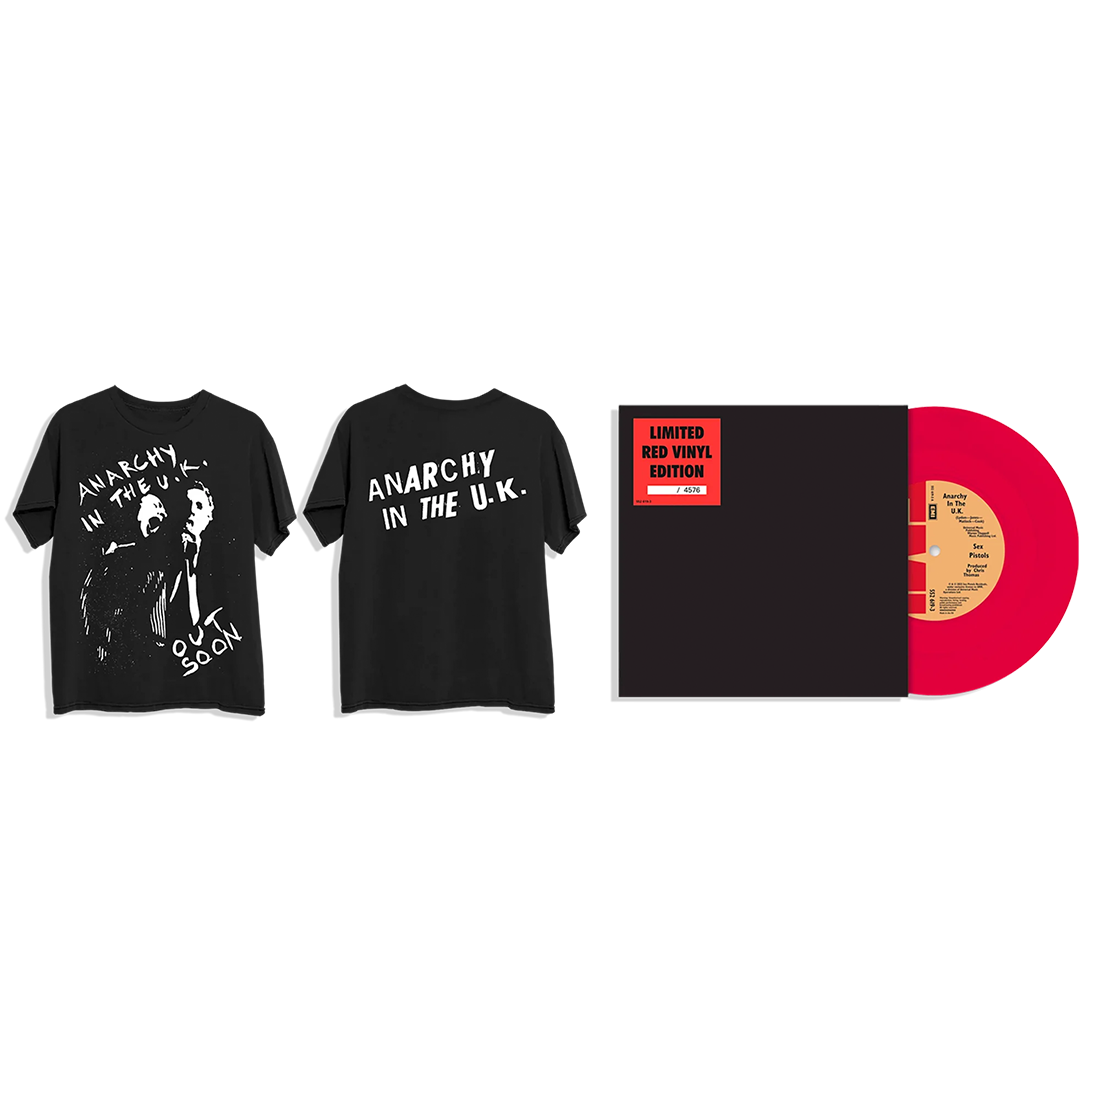 Anarchy in The UK: Exclusive Red Vinyl 7" + Anarchy in the UK Out Soon Black T-Shirt